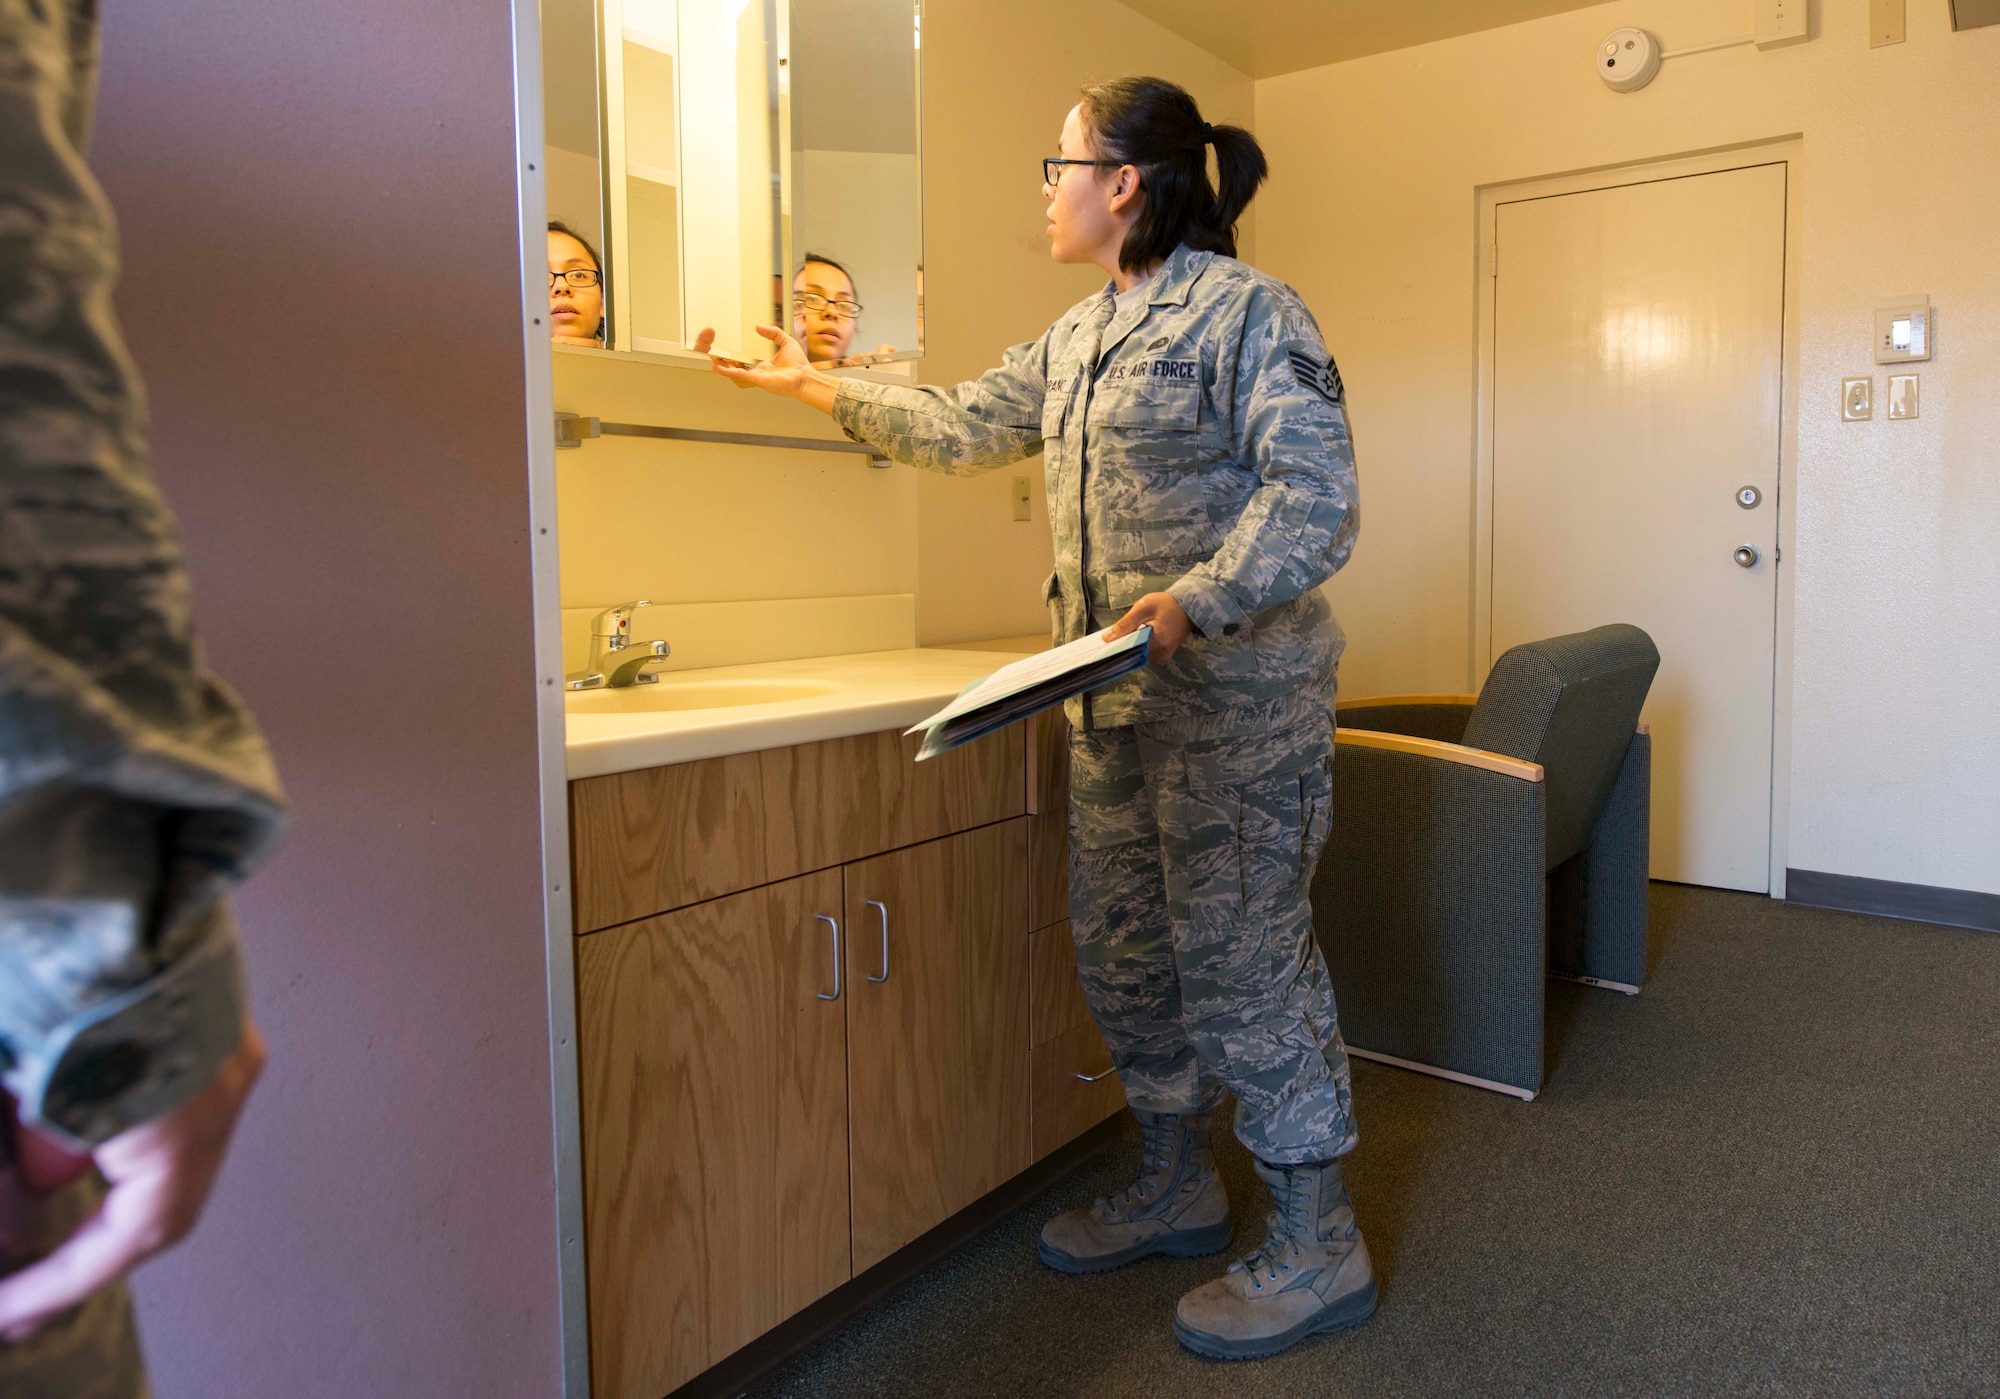 U.S. Air Force Staff Sgt. Marcela Serrano, 7th Civil Engineer Squadron airman dormitory leader, conducts a dorm inspection at Dyess Air Force Base, Texas, Feb. 7, 2017. Dorm management helps 30-40 Airmen daily process in and out of the dorms, coordinate maintenance work orders and answer questions about dorm life. They facilitate approximately 1,600 work orders a year, which can include anything from fixing an air conditioning unit to repairing an inoperable I.D. card reader. (U.S. Air Force photo by Airman 1st Class Austin Mayfield)